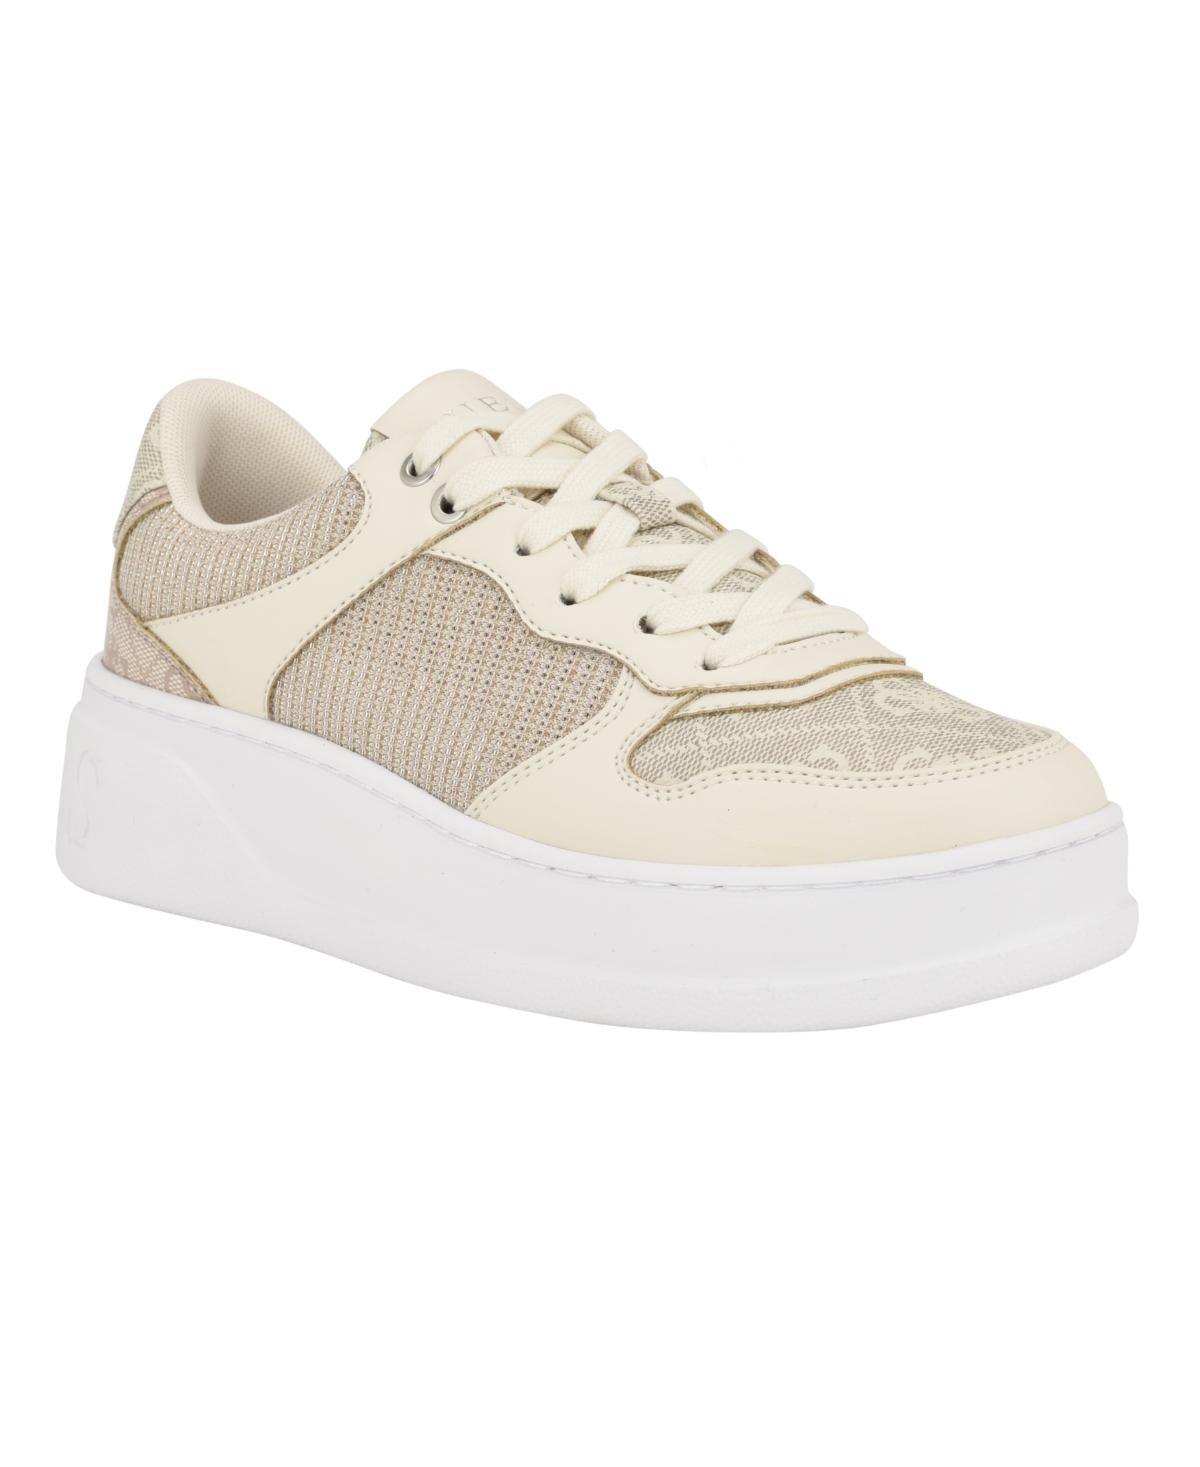 Guess Cleva Lace Up Logo Platform Fashion Sneakers in White | Lyst